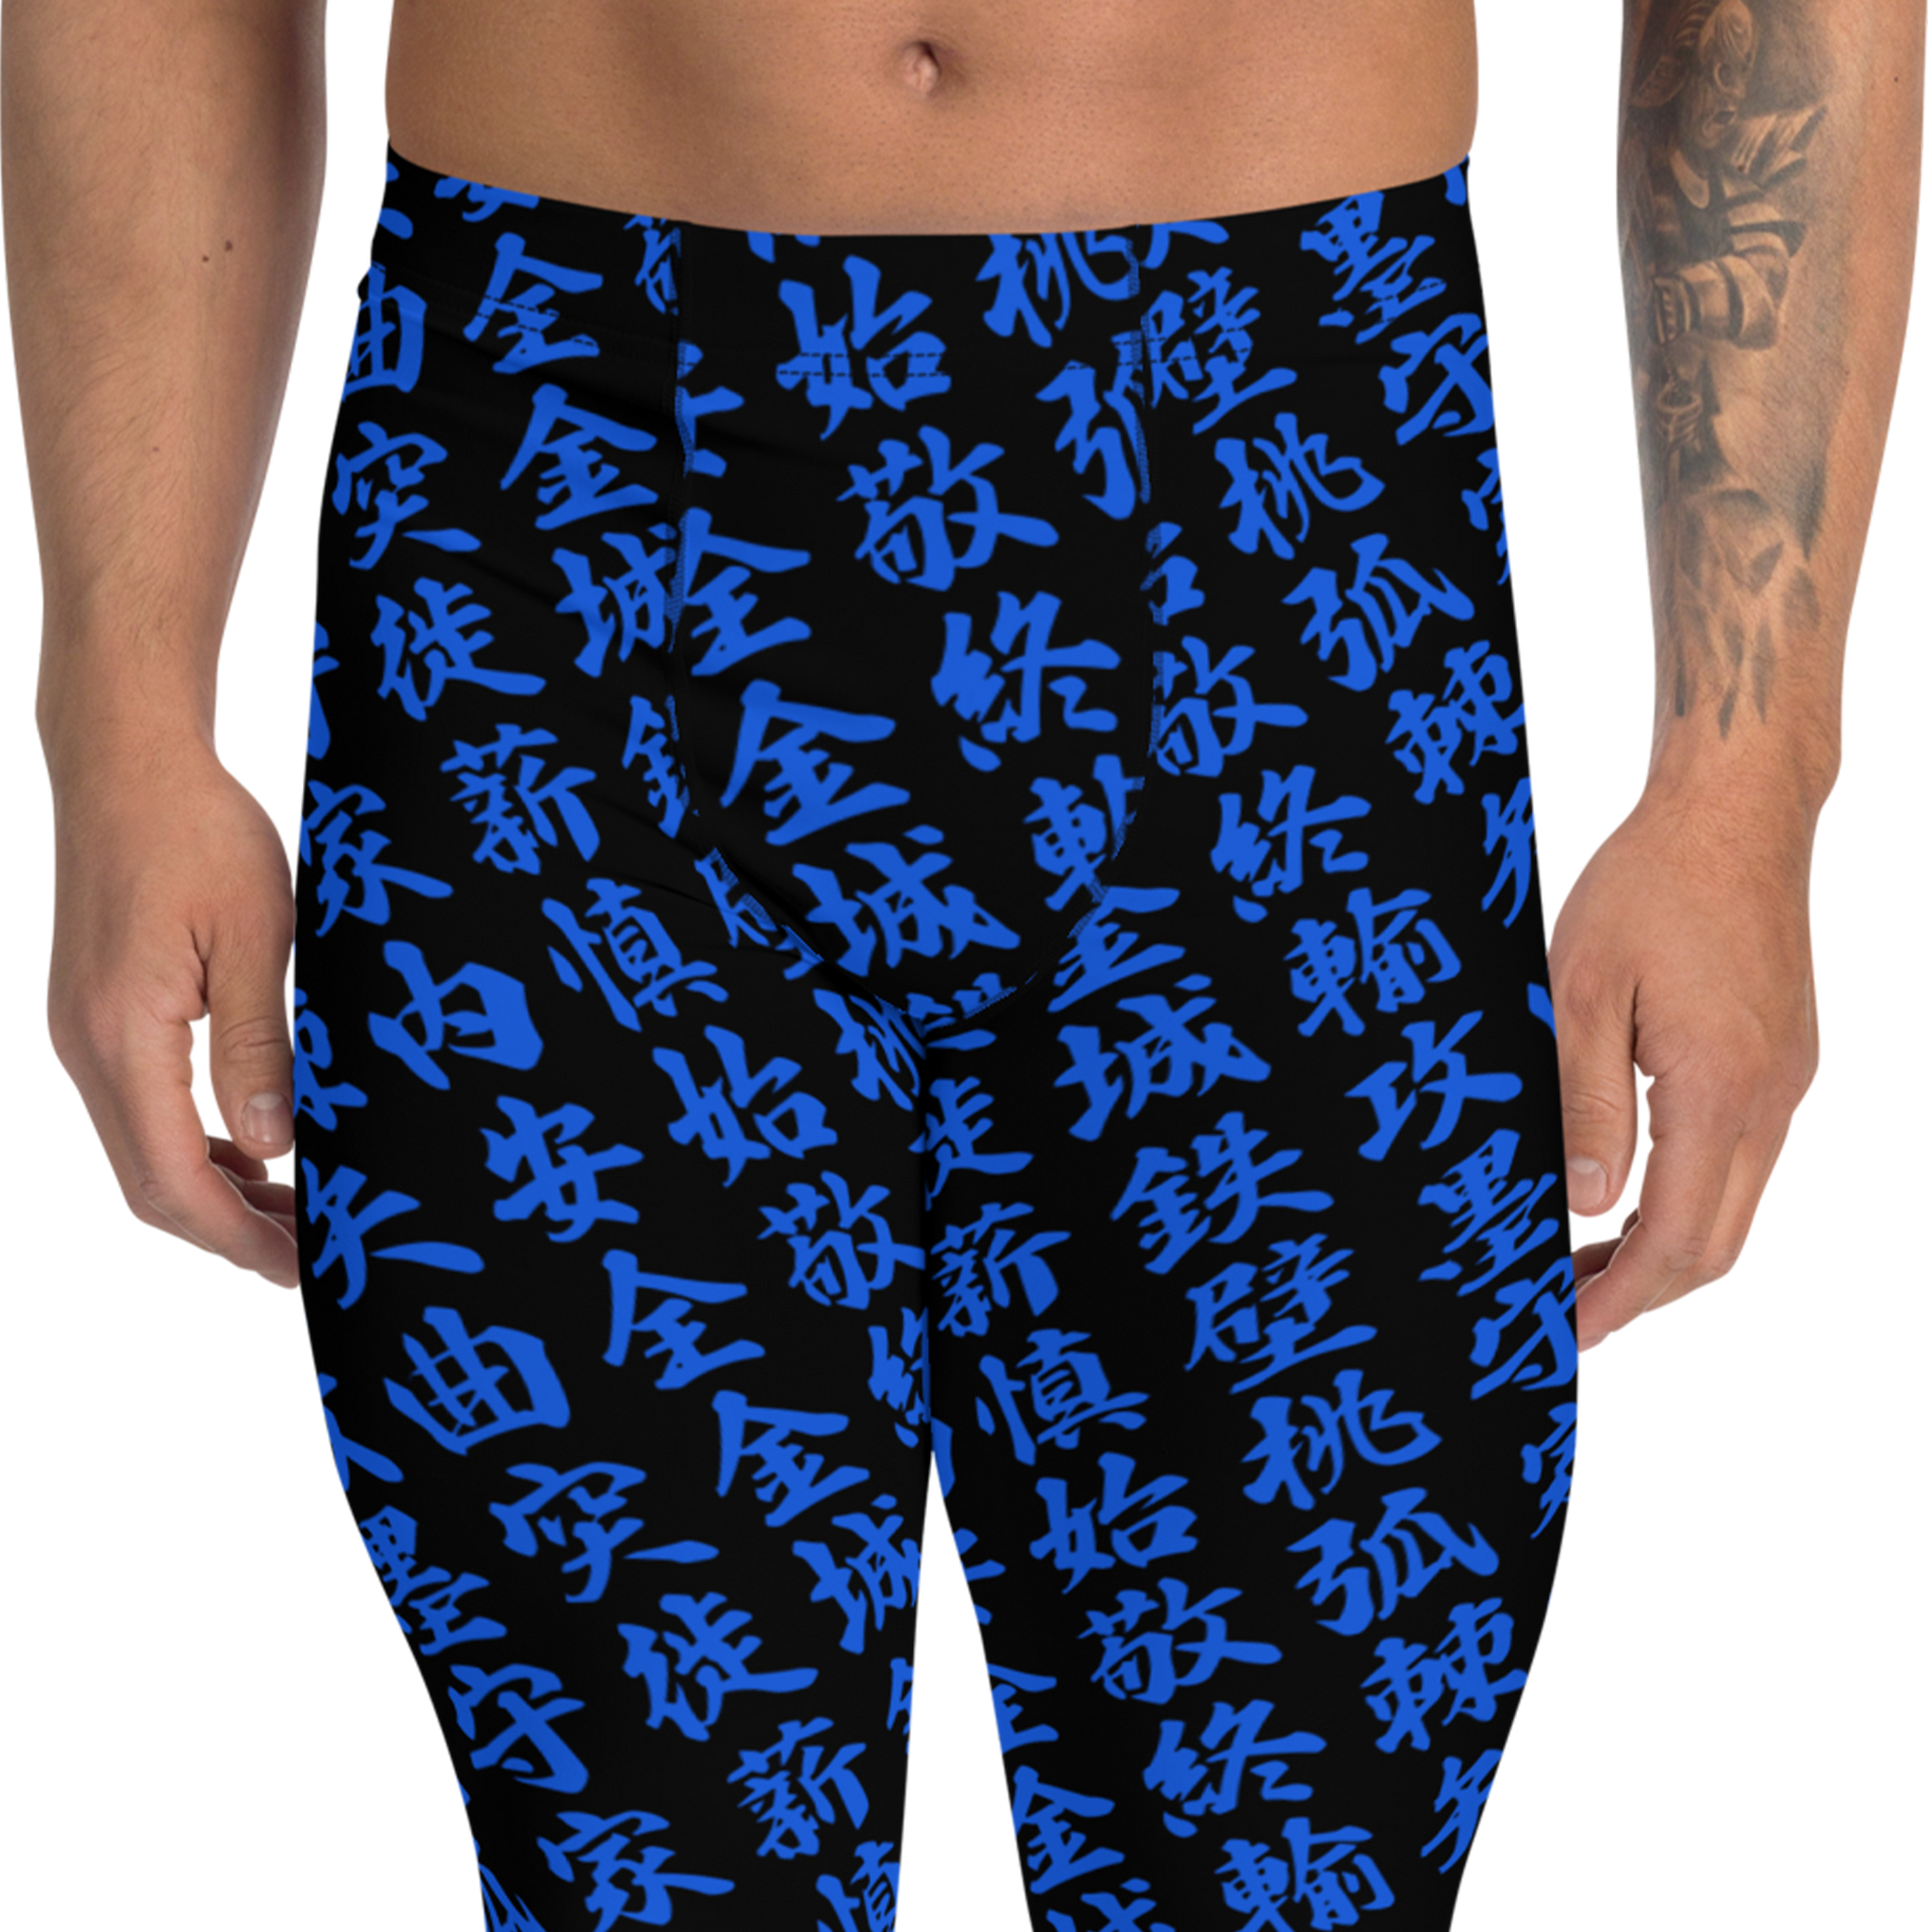 Men's black/blue leggings with all-over print in Japanese KANJI - Front Placement